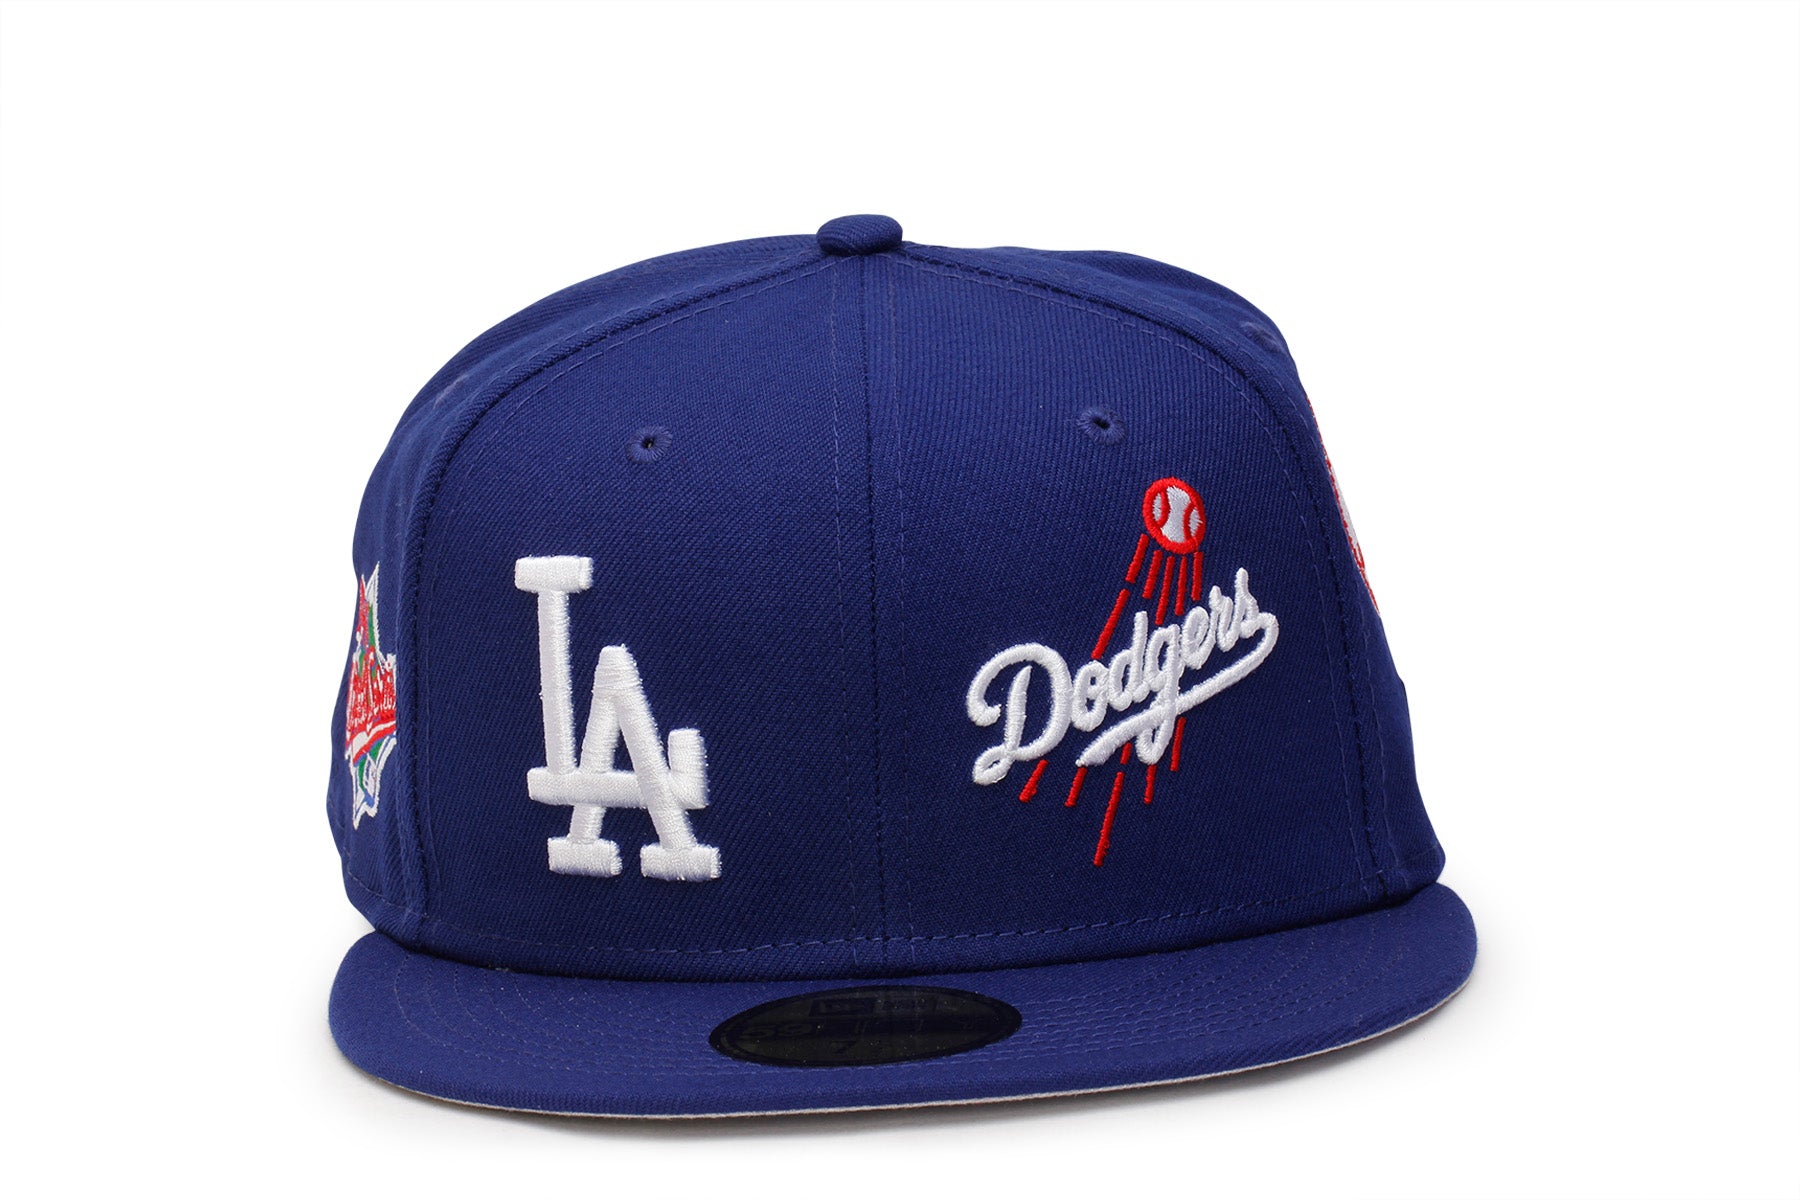 Men's New Era Royal Los Angeles Dodgers White Logo 59FIFTY Fitted Hat